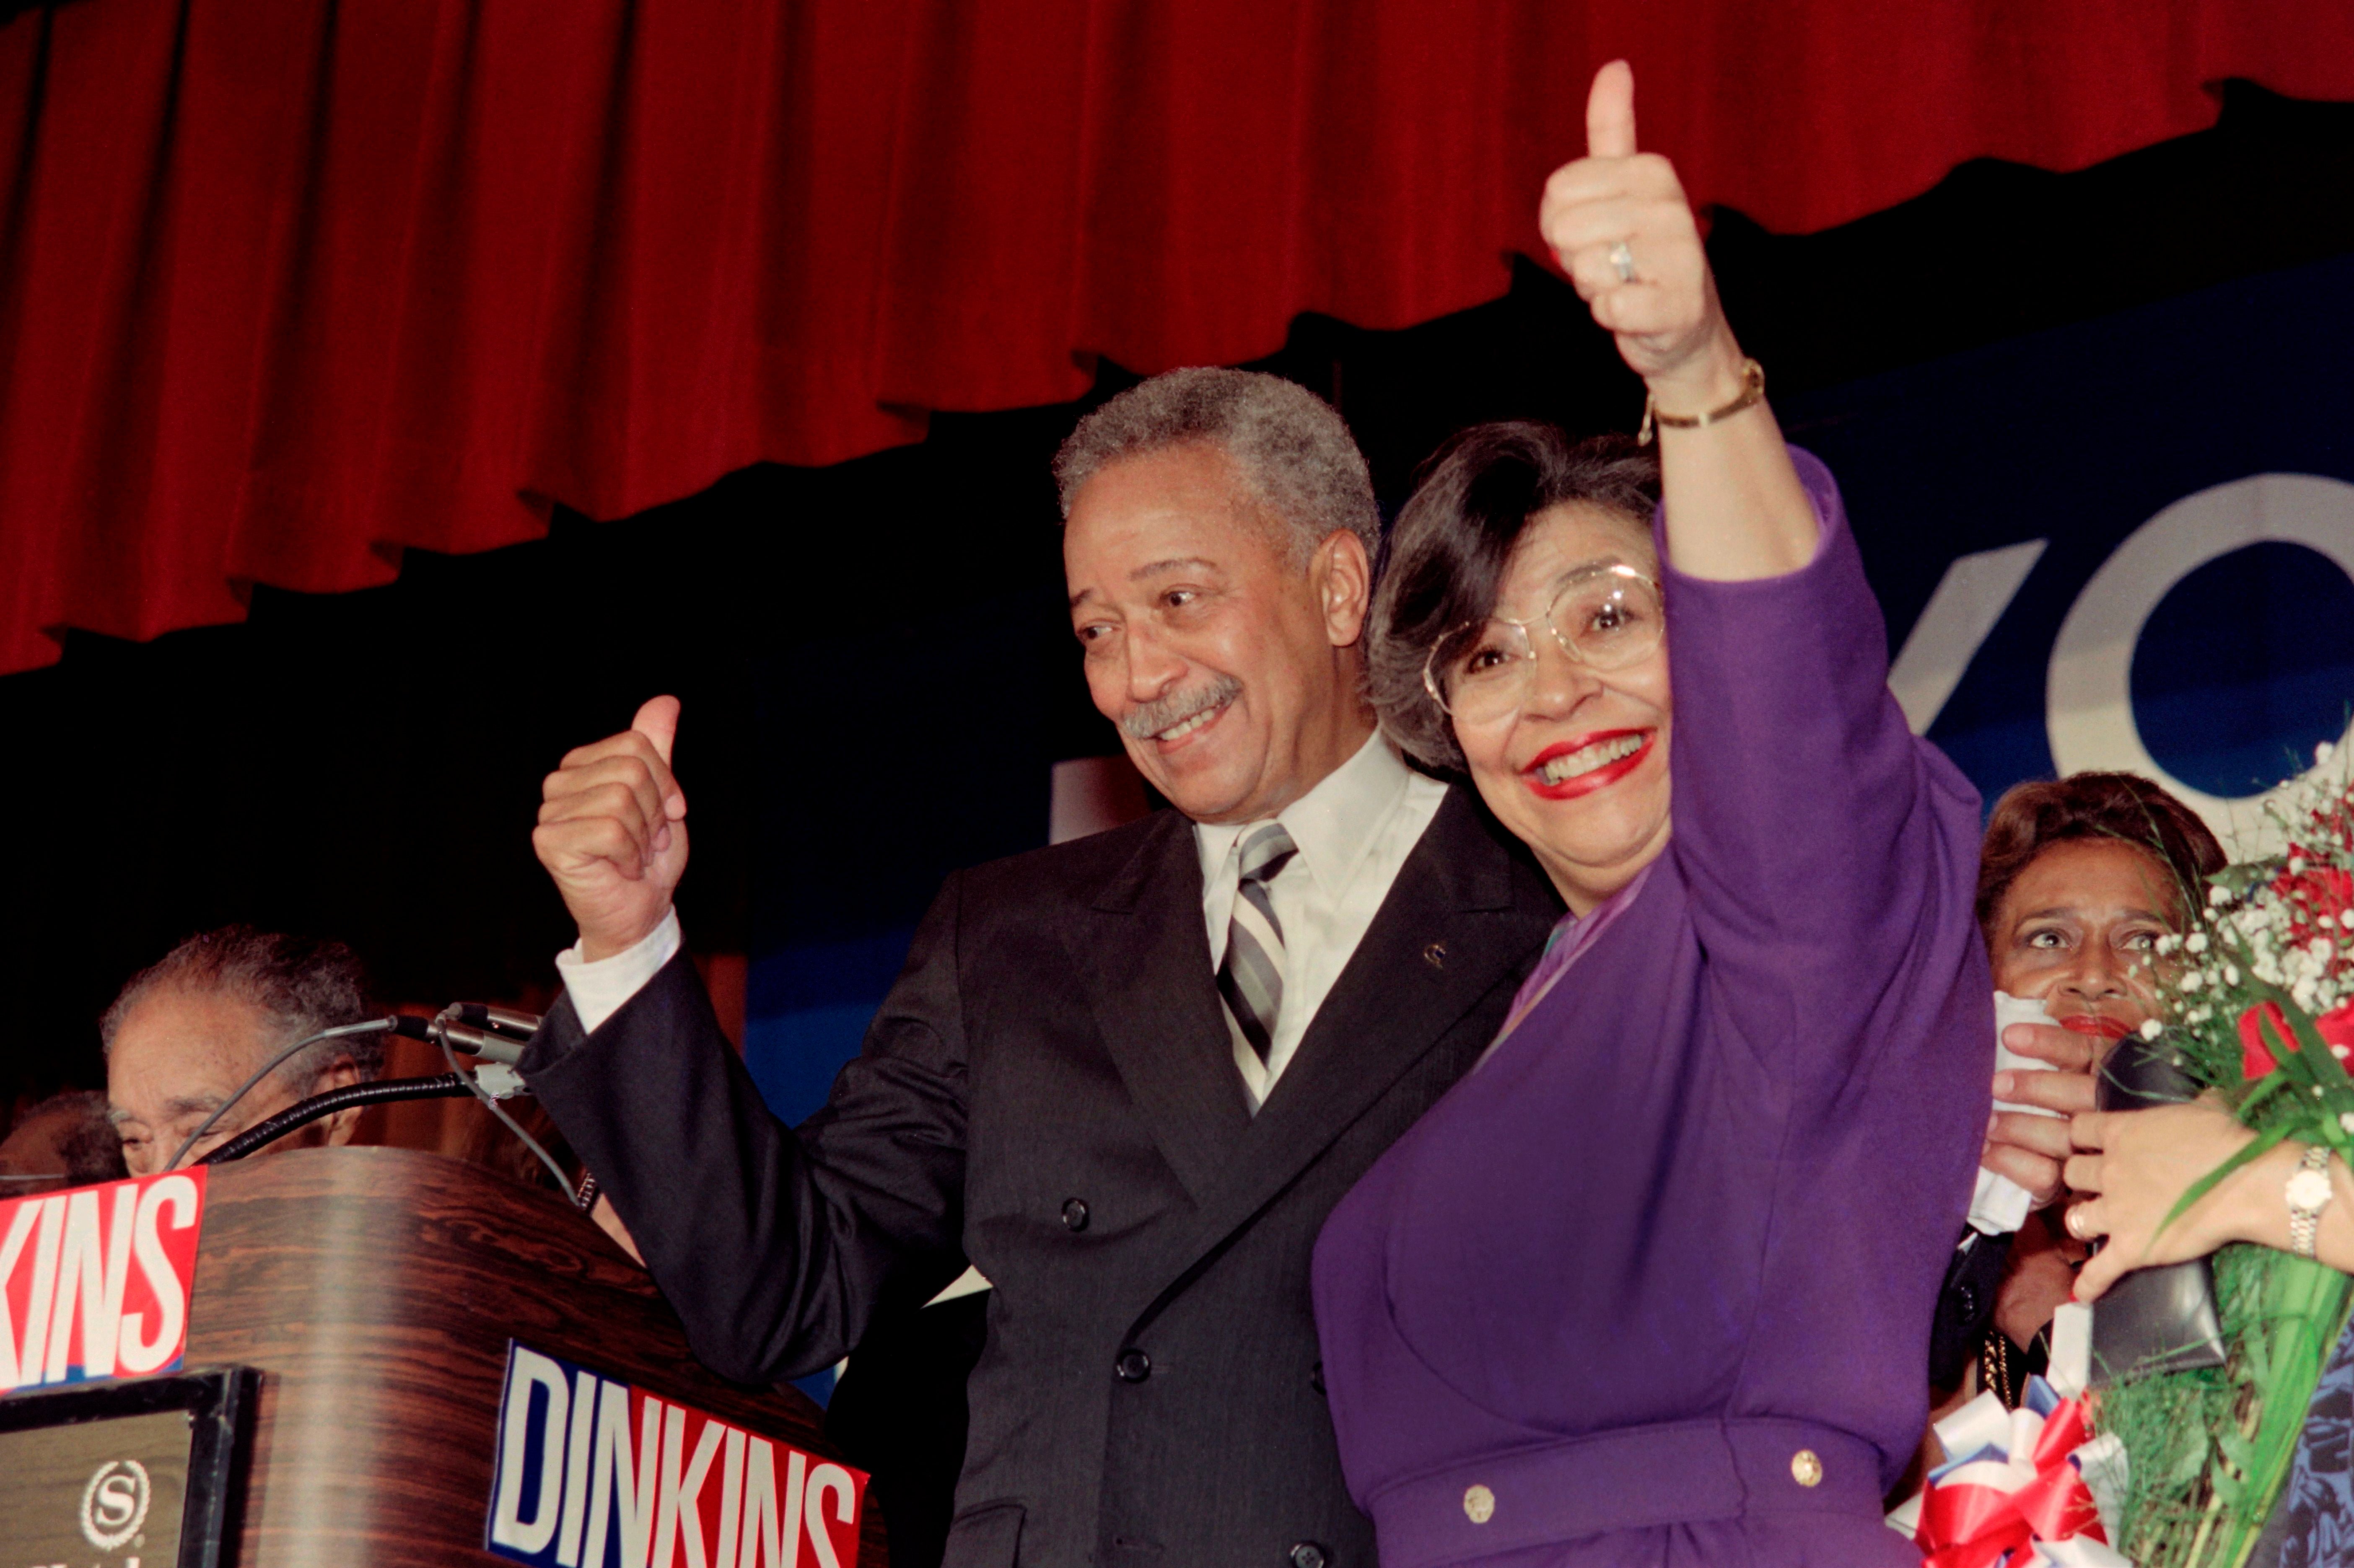 History maker: Dinkins celebrates with his wife Joyce after being elected in 1989